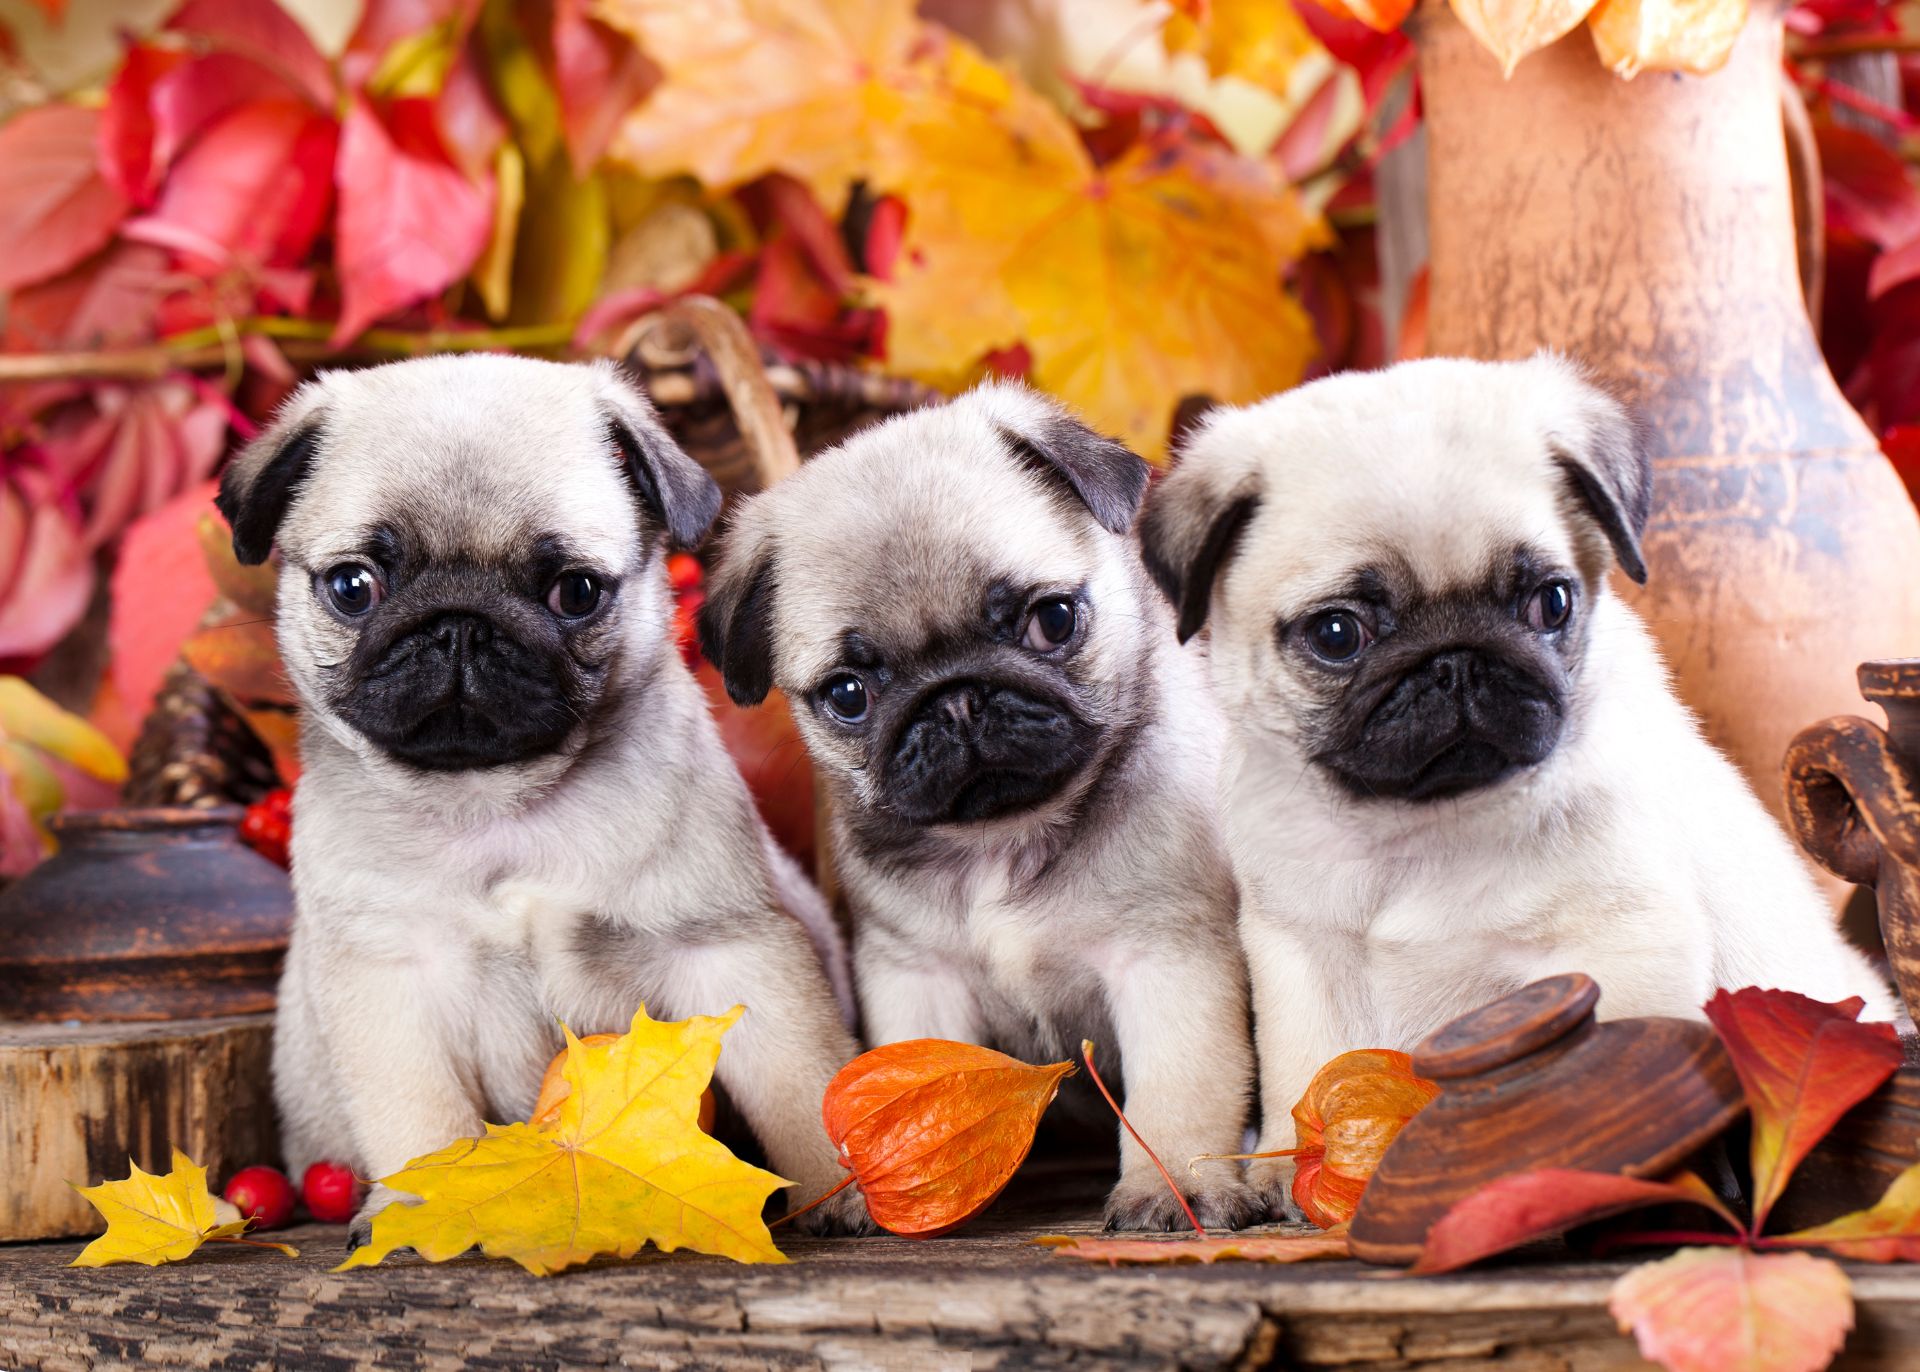 Three pug puppies in a setting with fall leaves in the background and foreground